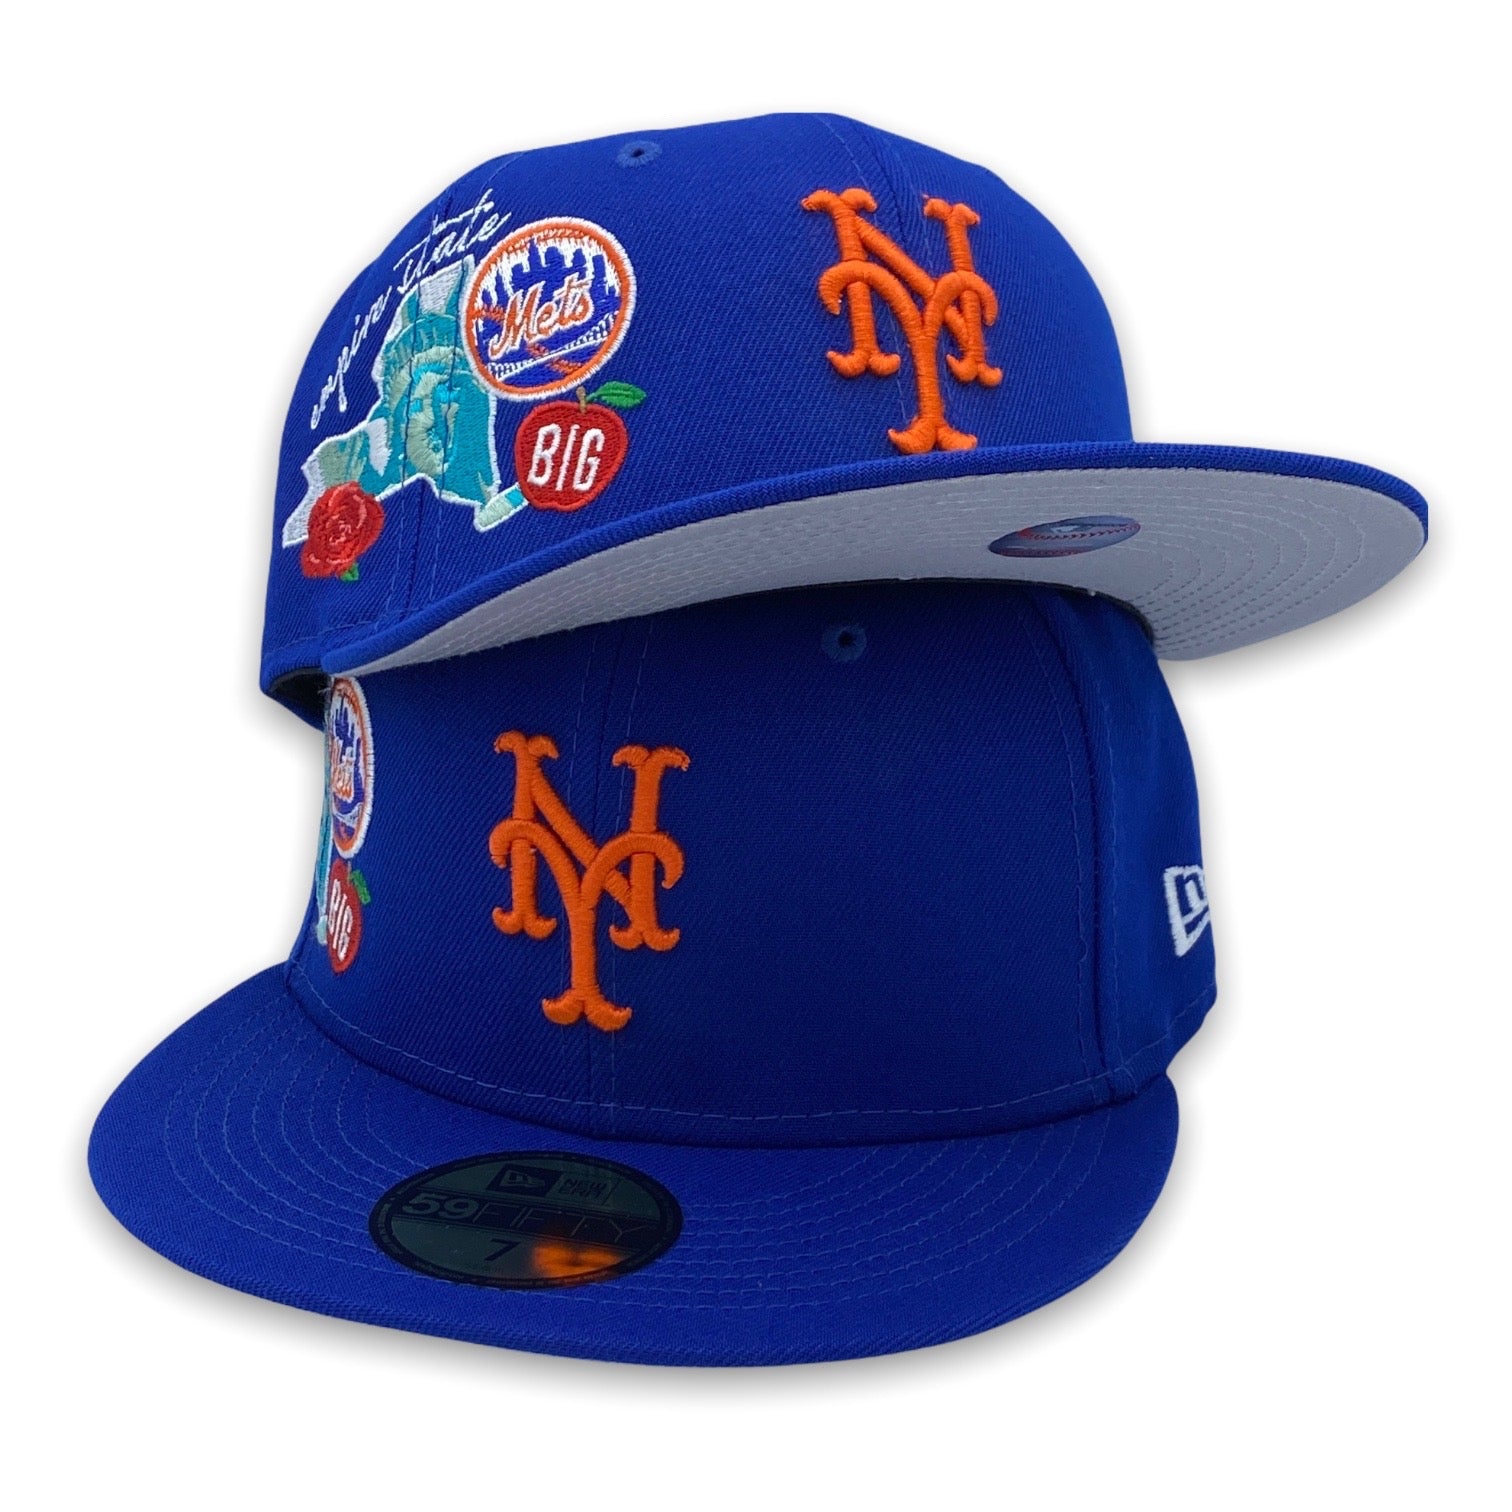 Mets USA fitted cap size 8